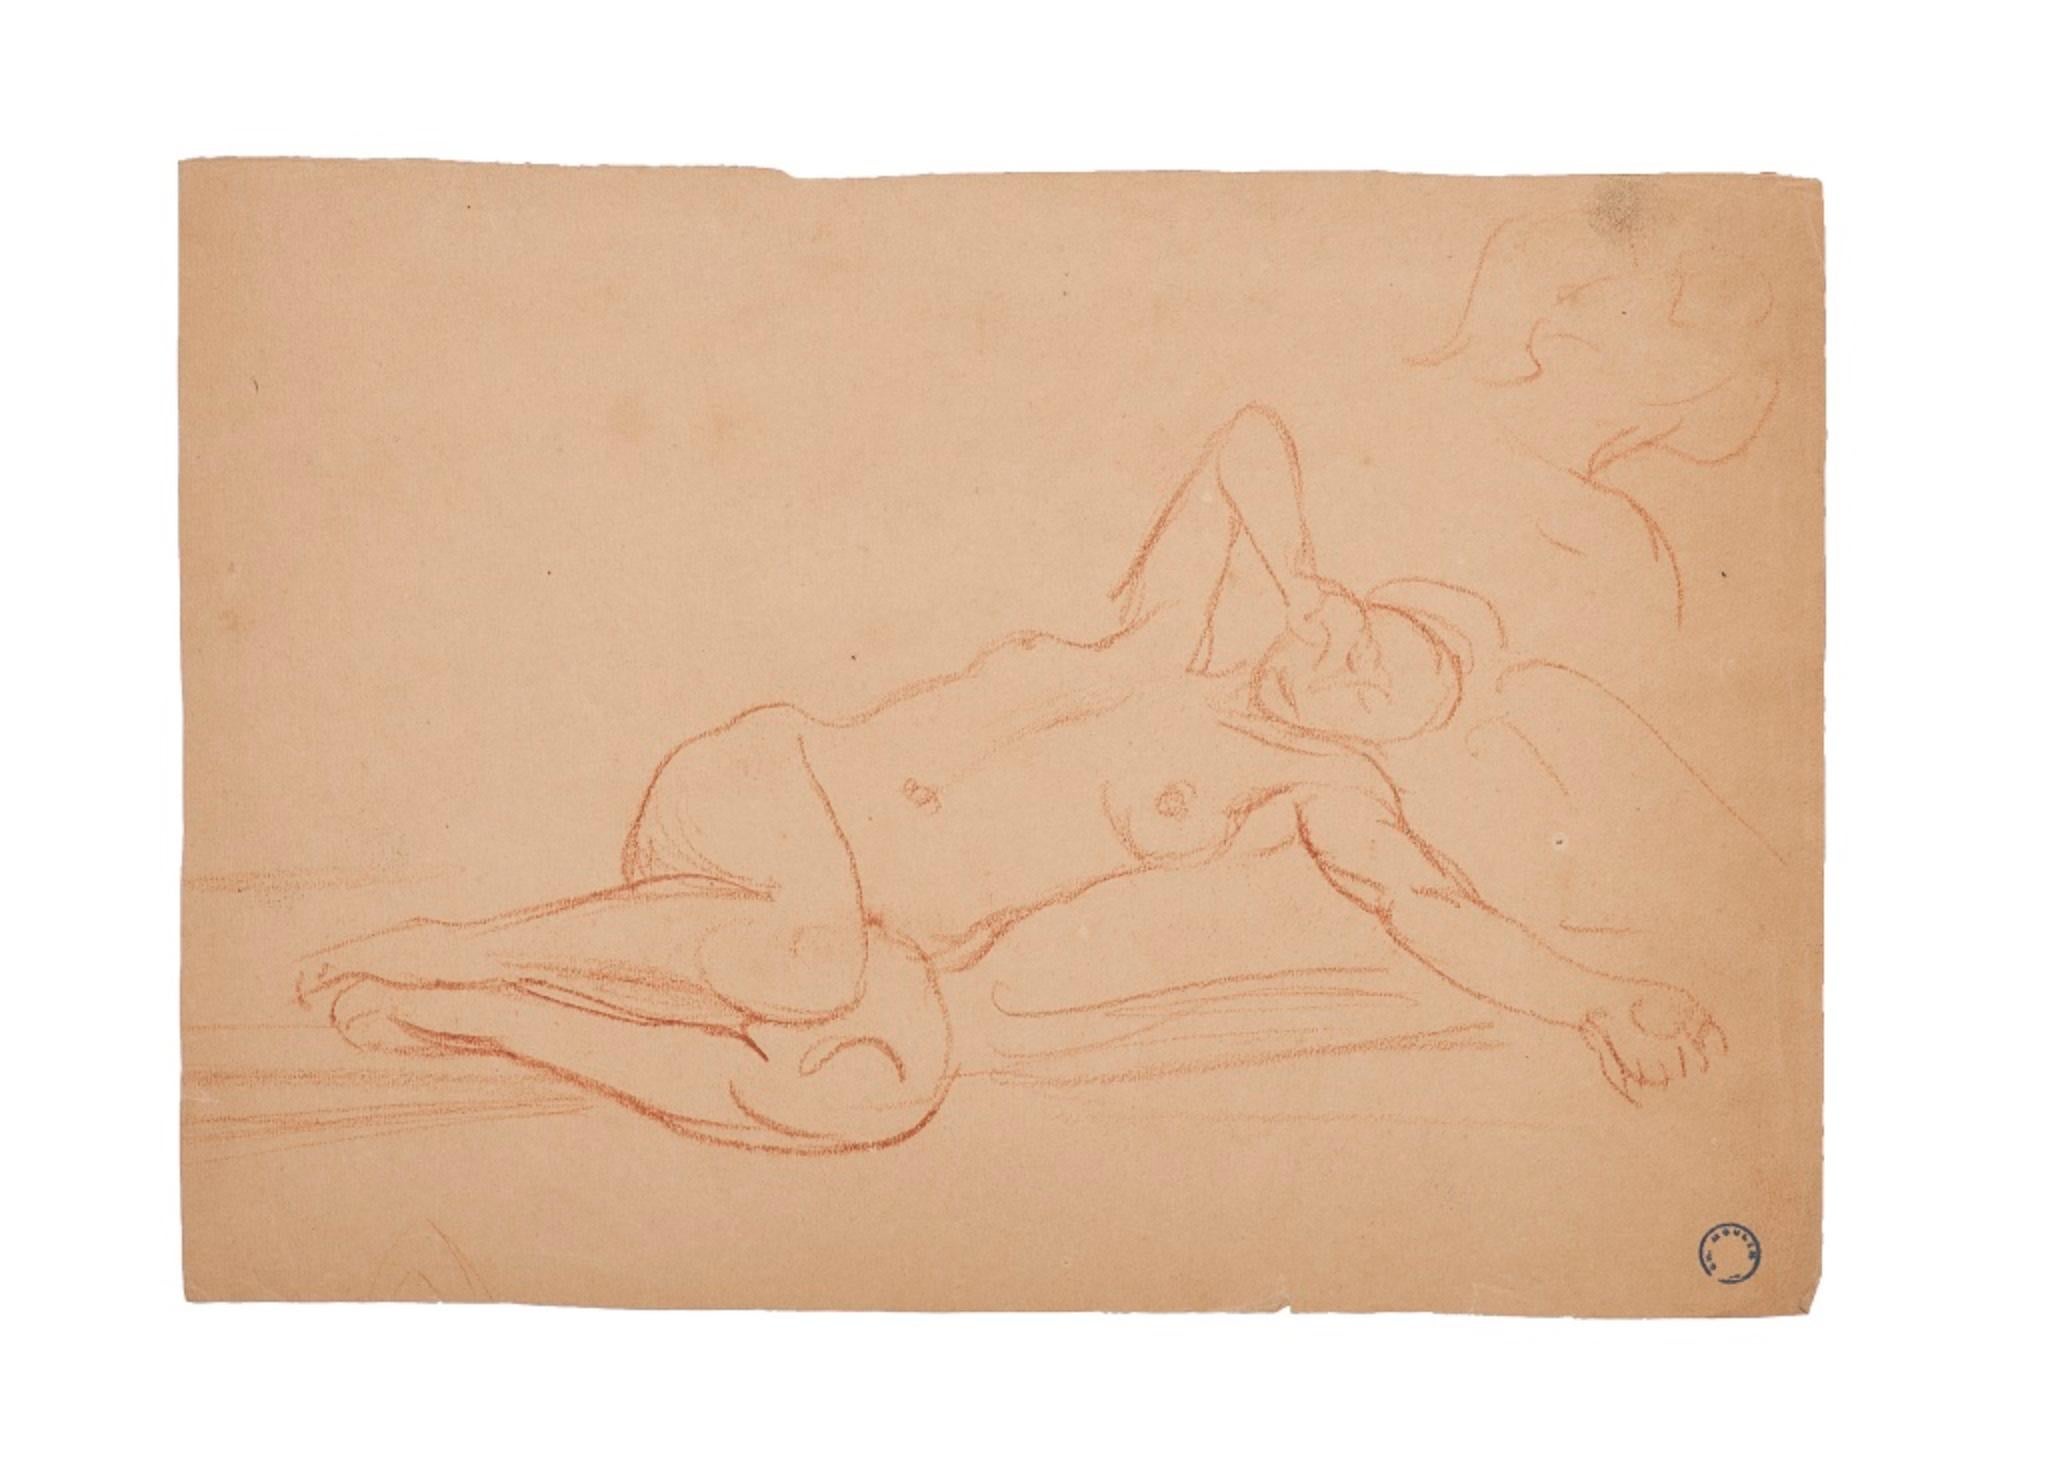 Lying Nude of Woman - Original Pencil by C. L. Moulin - Early 20th Century - Art by Charles Lucien Moulin